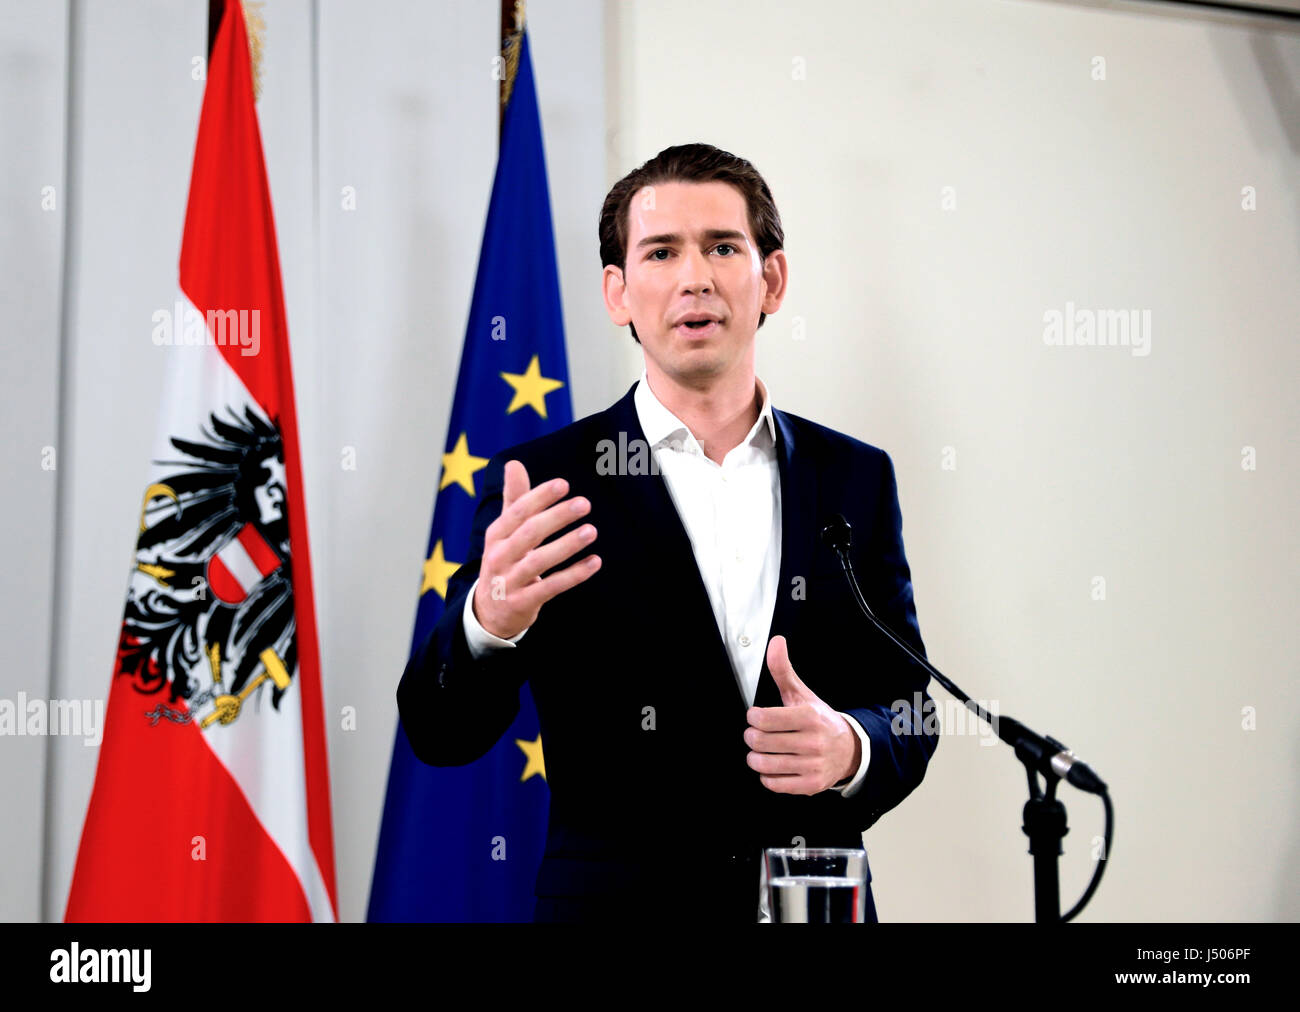 Vienna, Austria. 14th May, 2017. Austria's Foreign Minister Sebastian Kurz addresses a news conference after a meeting of Austrian people's party (OVP) in Vienna, capital of Austria, on May 14, 2017. Austria's Foreign Minister Sebastian Kurz was elected on Sunday as the chief of Austrian people's party (OVP). Credit: Pan Xu/Xinhua/Alamy Live News Stock Photo